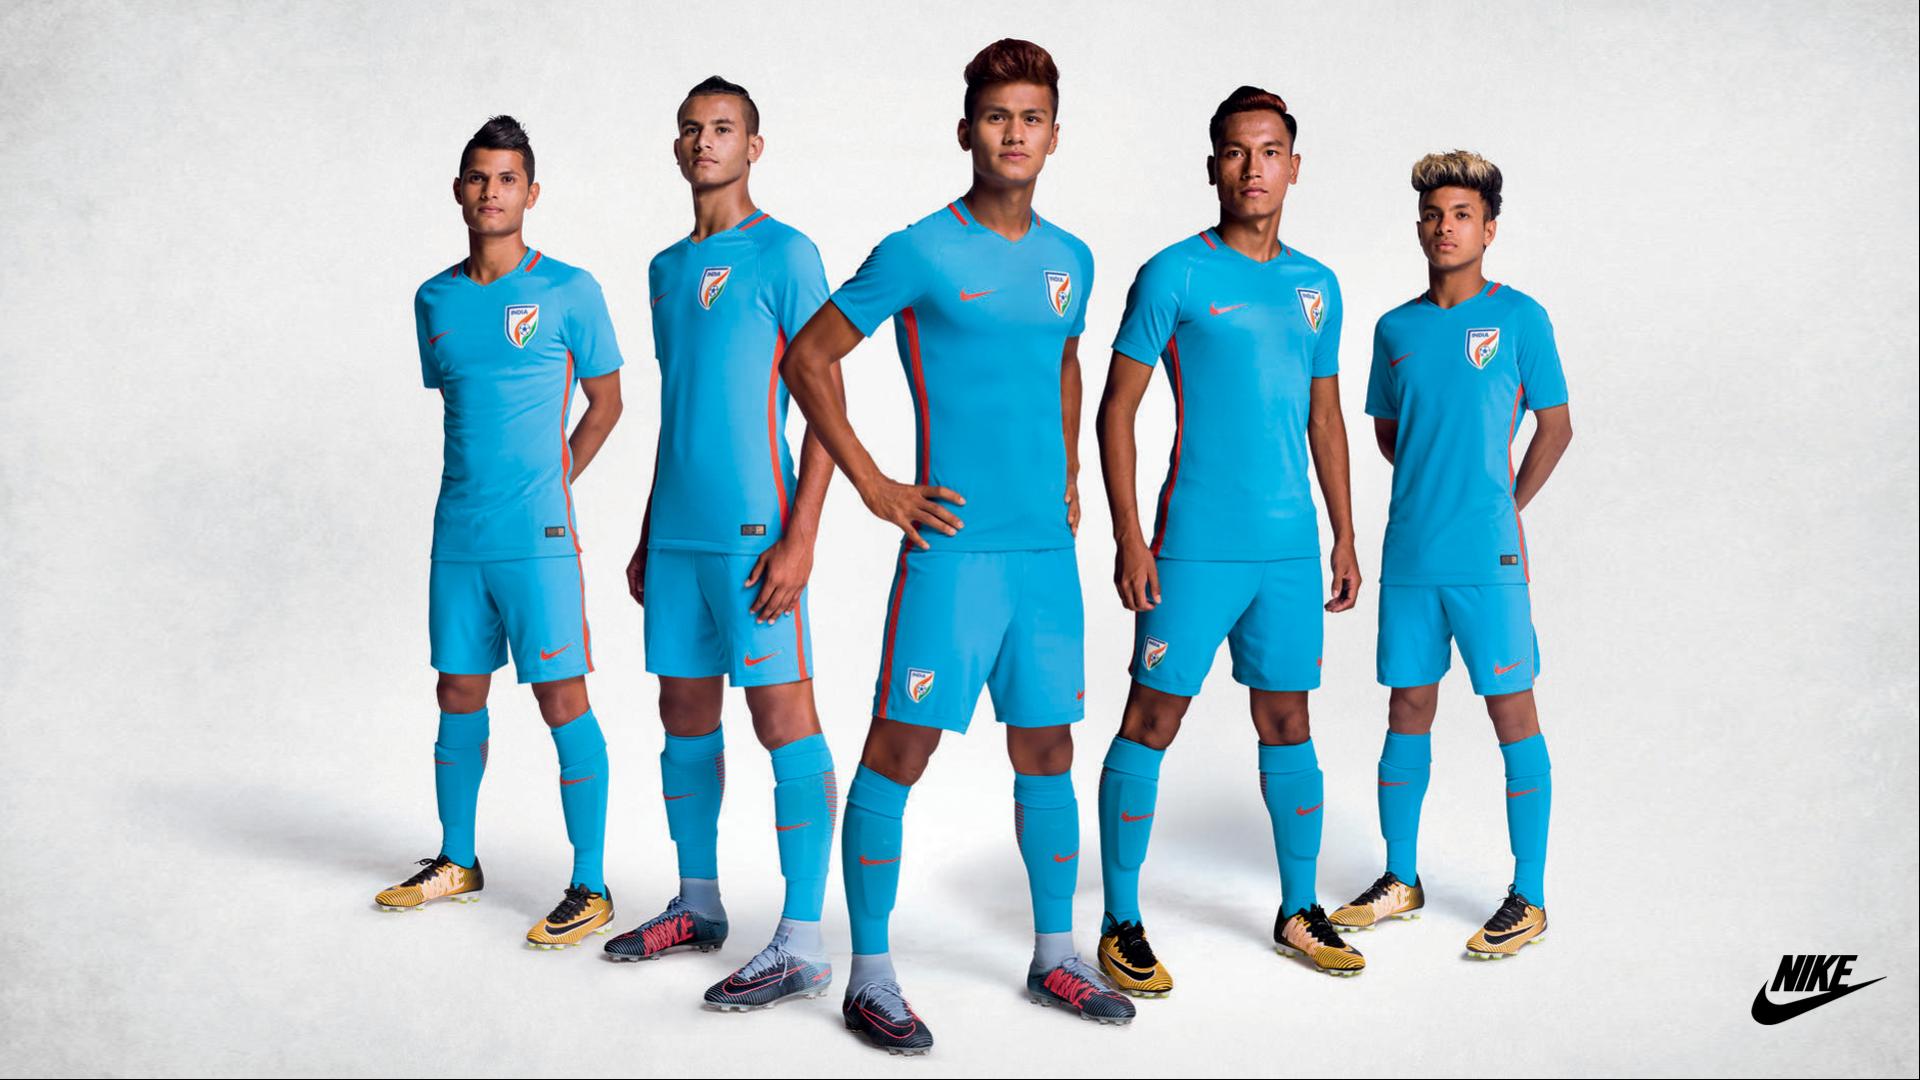 Nike Wallpaper with Indian New Football Kit Sets Blue Tigers Wallpaper. Wallpaper Download. High Resolution Wallpaper